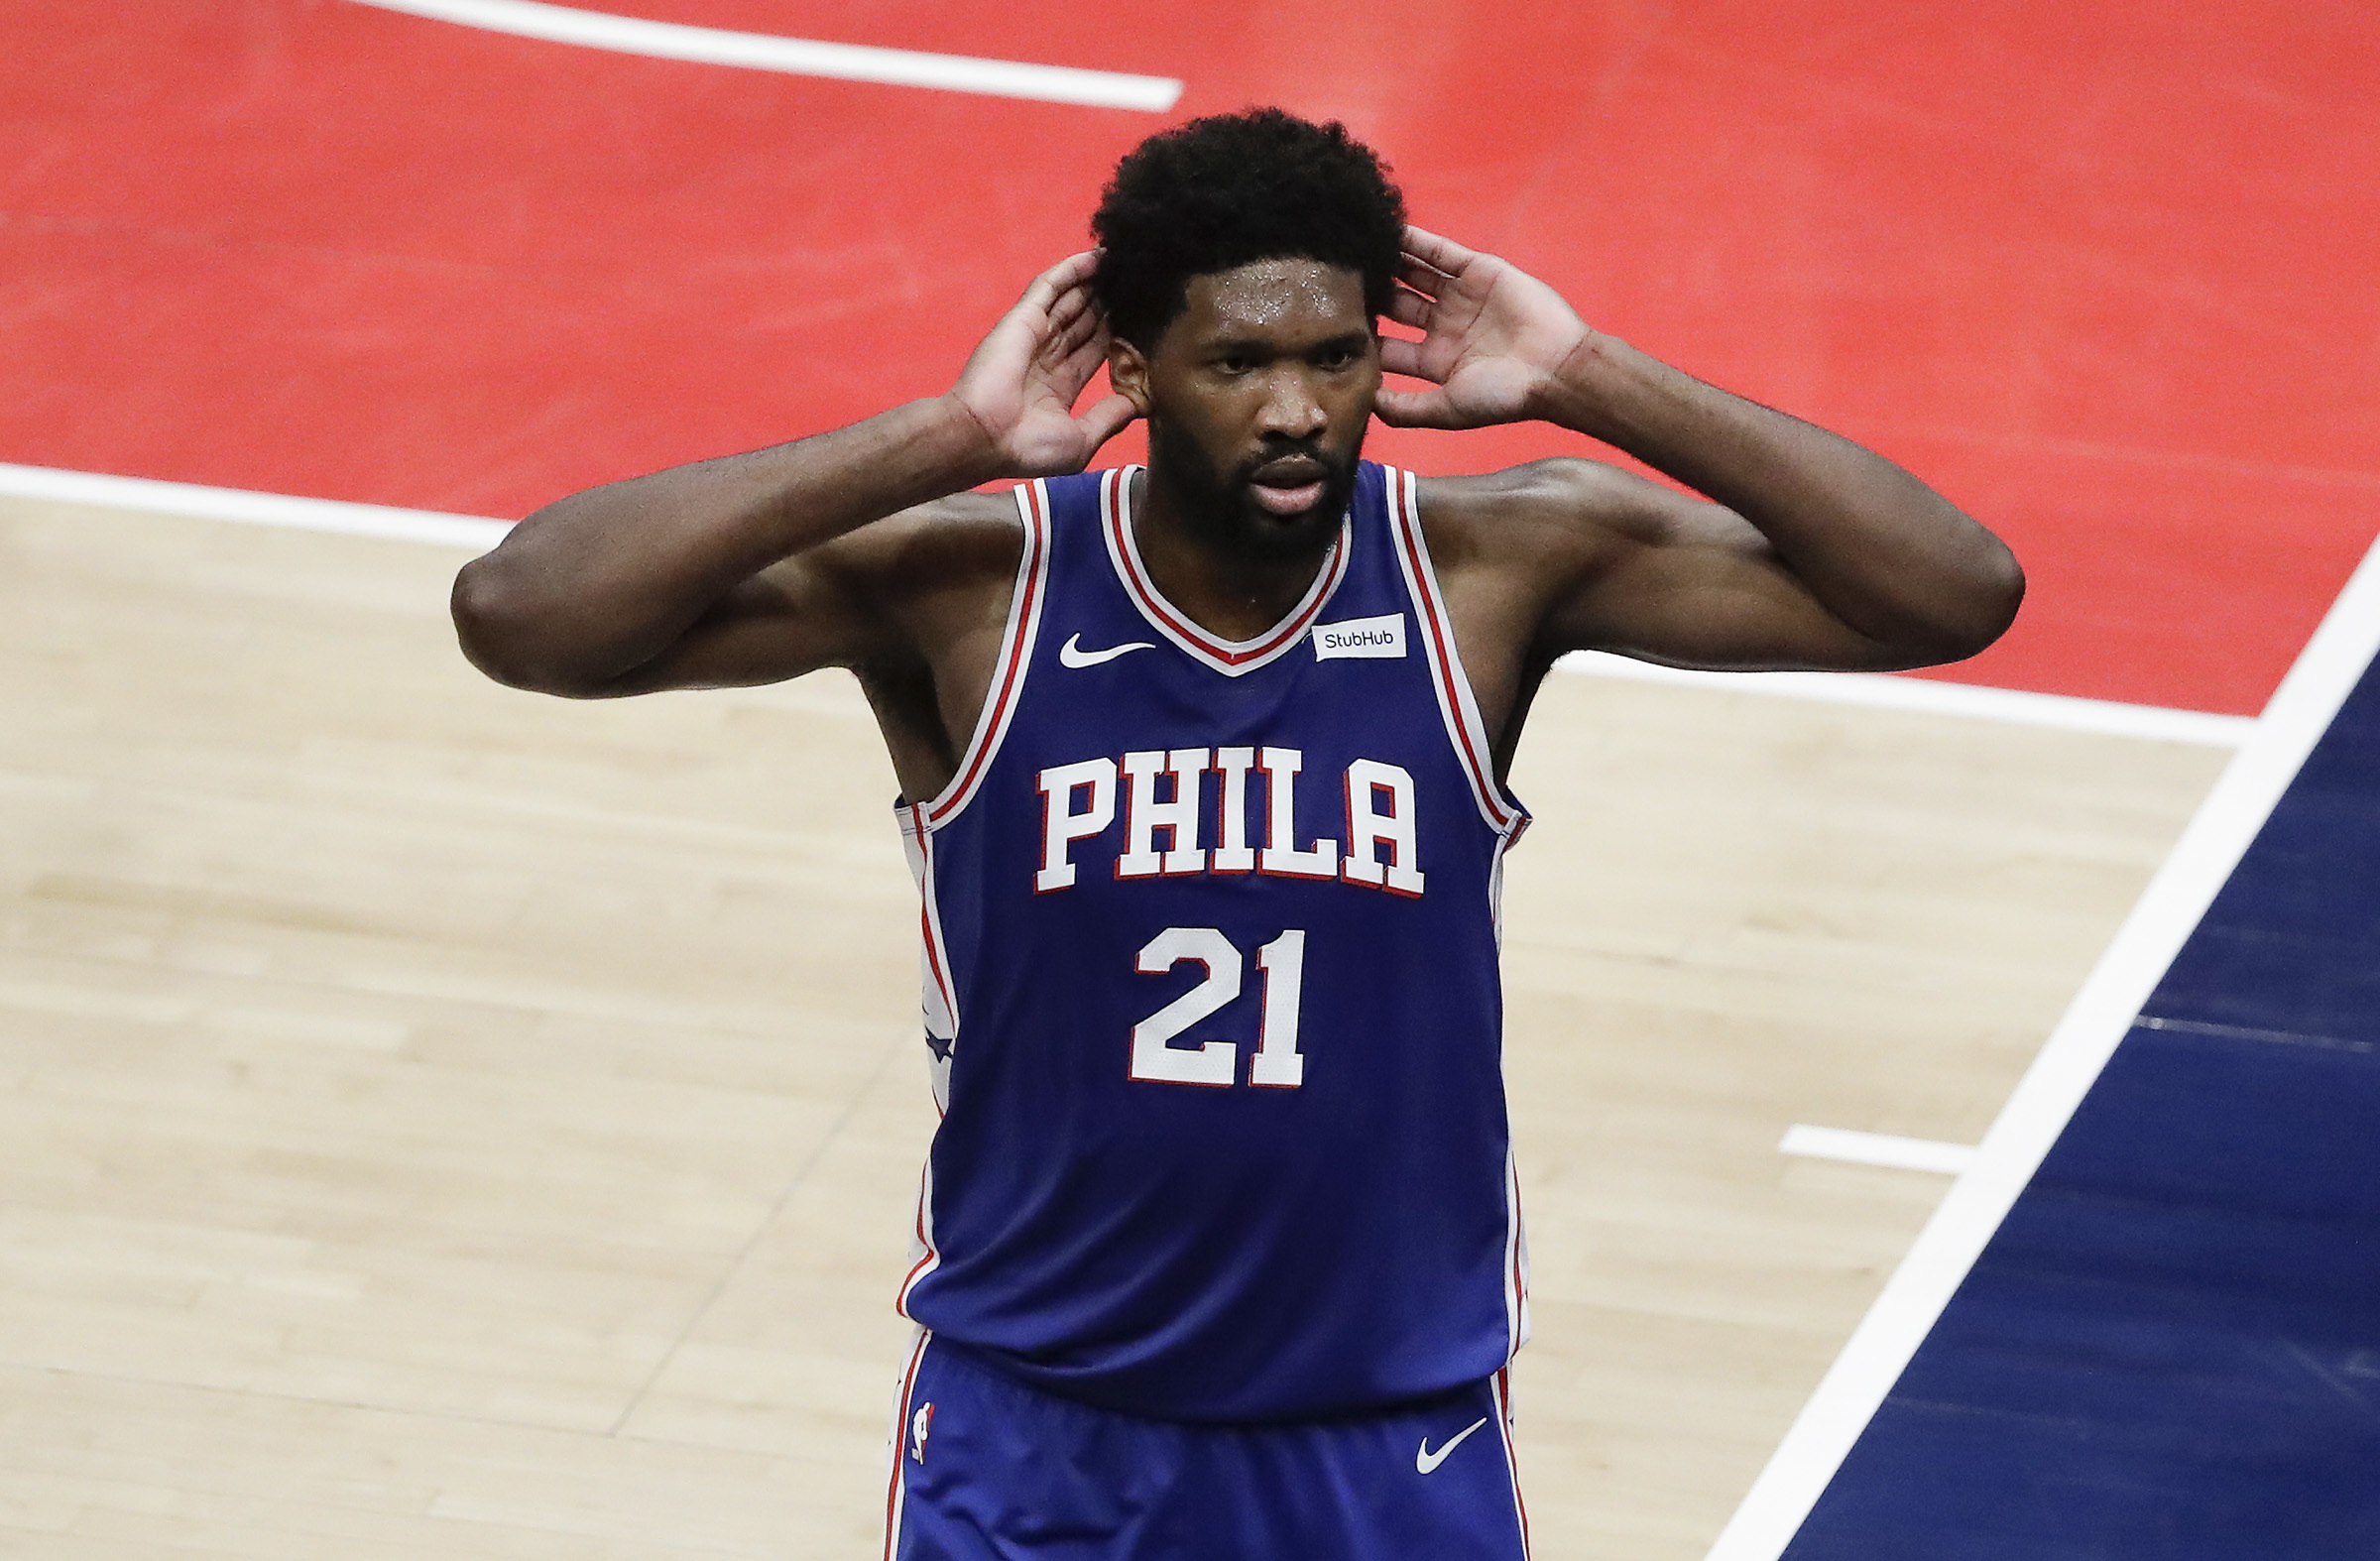 The NBA Player Who Inspired Joel Embiid to Play Basketball Sportsmanor